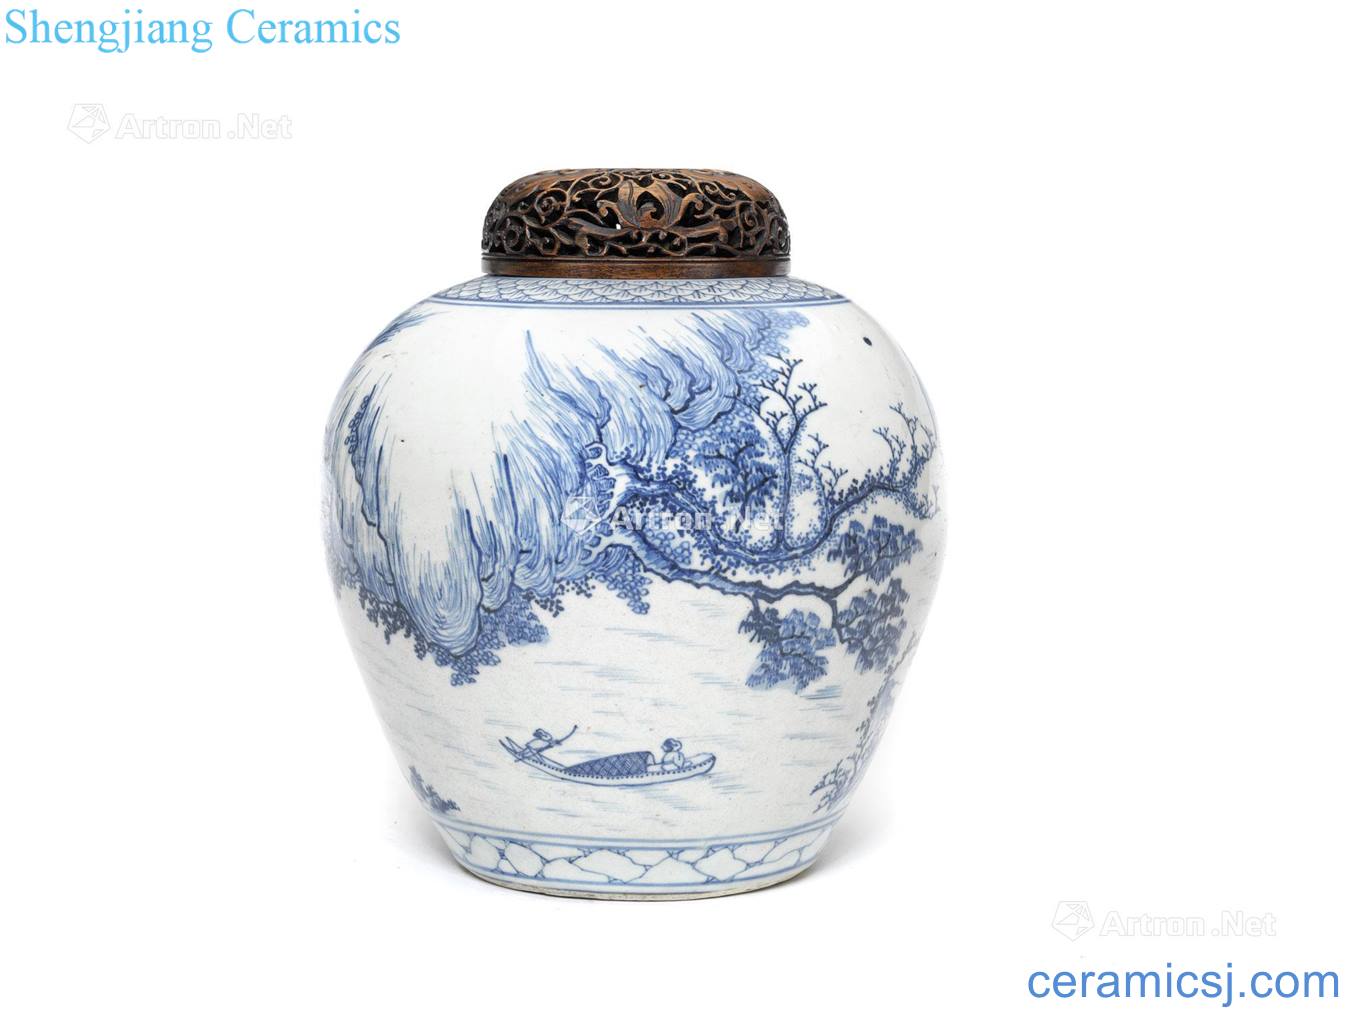 About 1660 years Blue and white linen Cun landscape figure cans